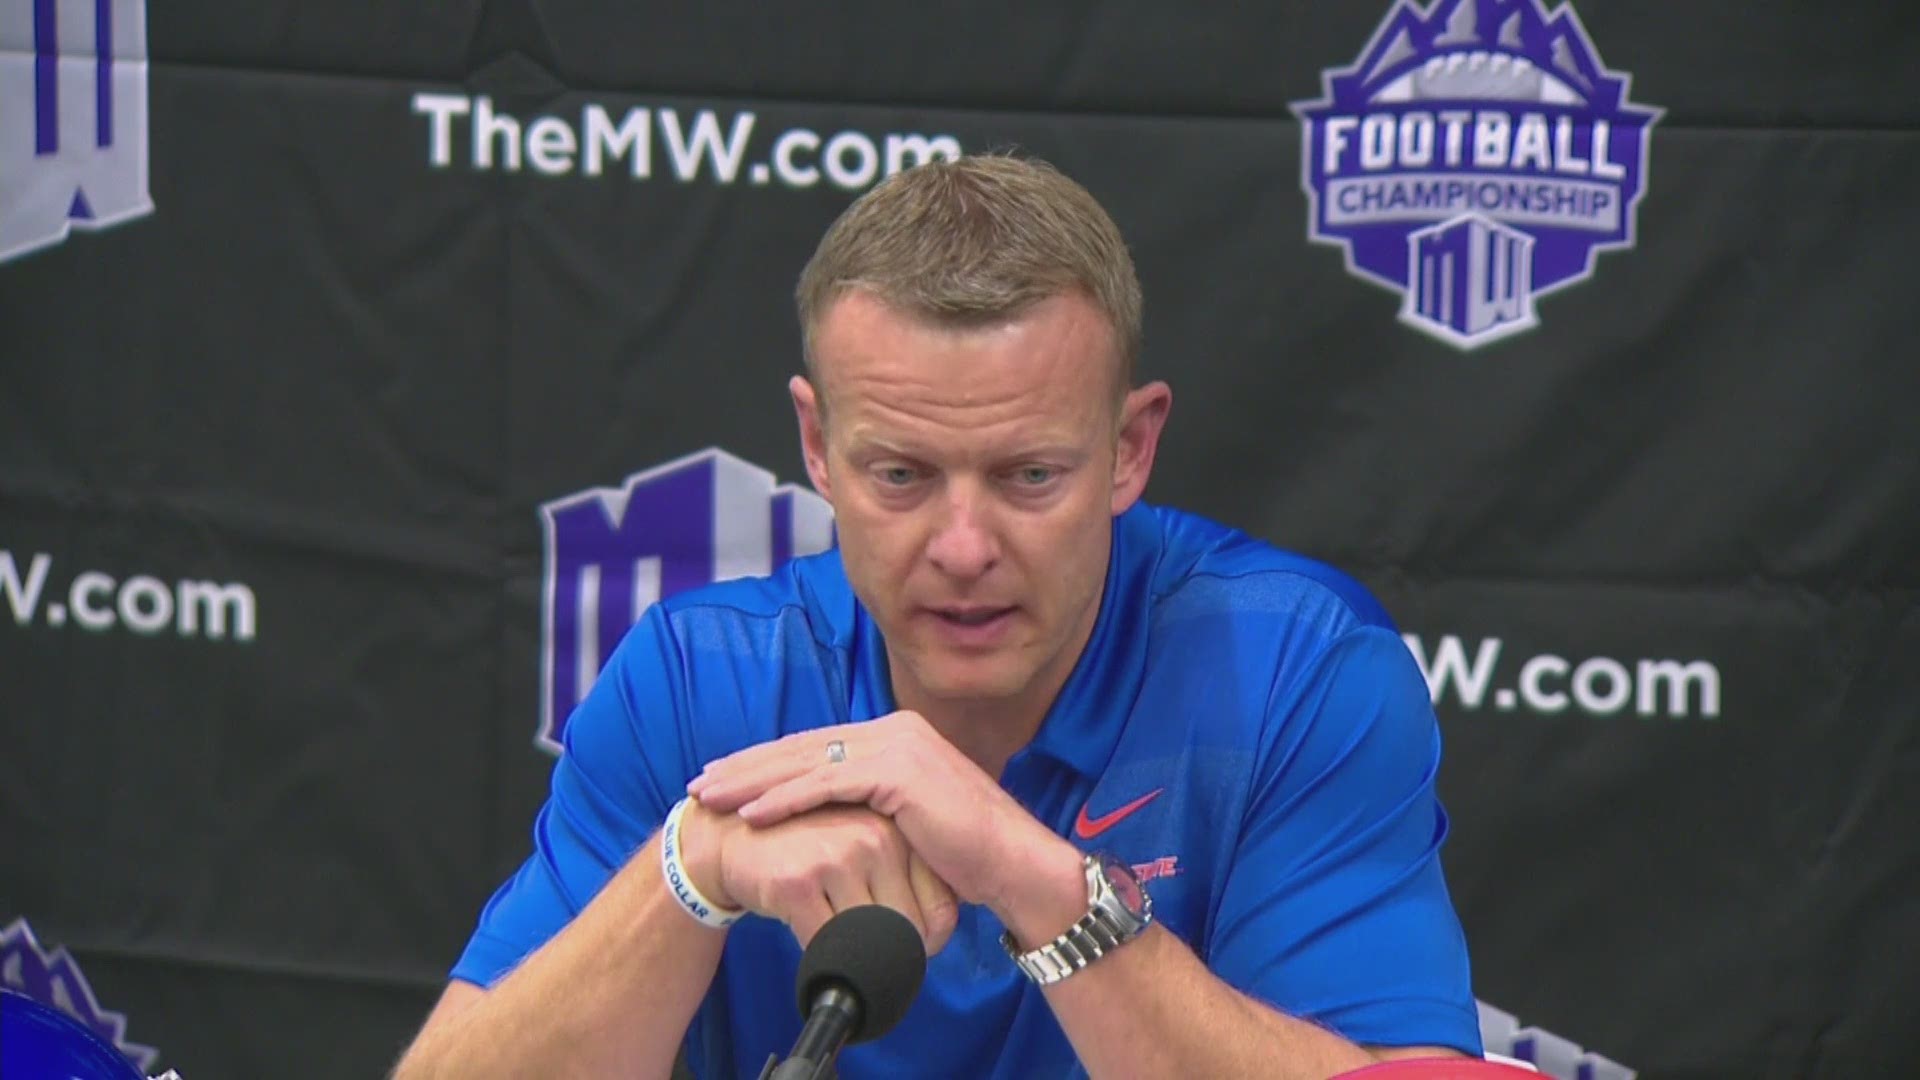 Head coach Bryan Harsin recaps last week's win against Utah State and looks ahead to the Broncos' Mountain West Conference Championship game against the Fresno State Bulldogs on Dec. 1.